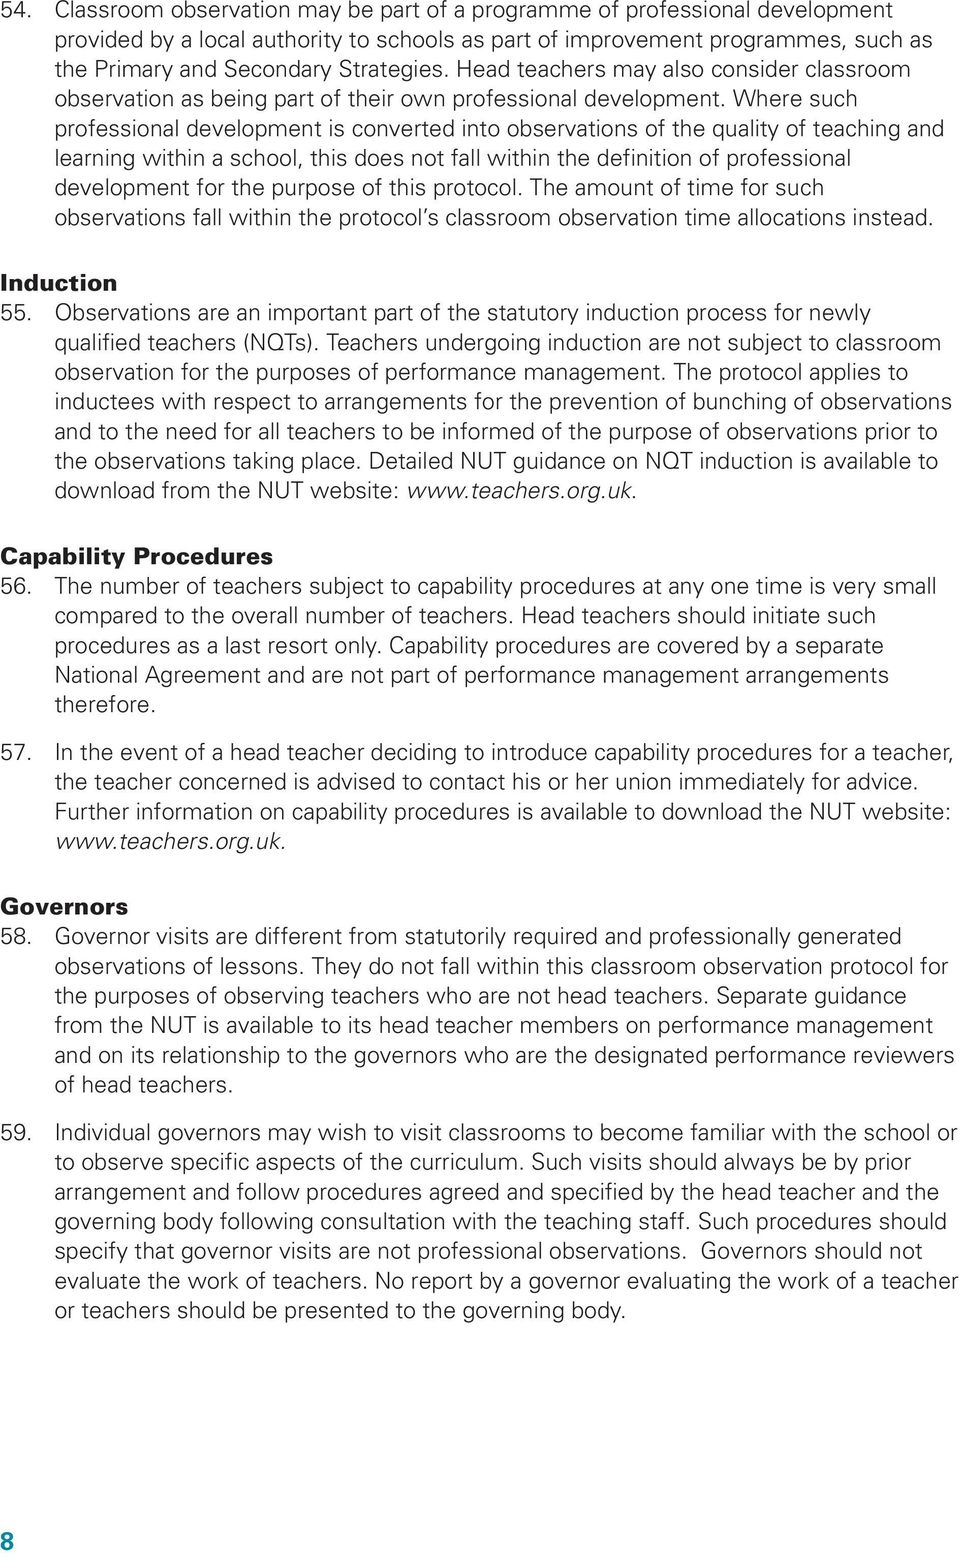 Where such professional development is converted into observations of the quality of teaching and learning within a school, this does not fall within the definition of professional development for